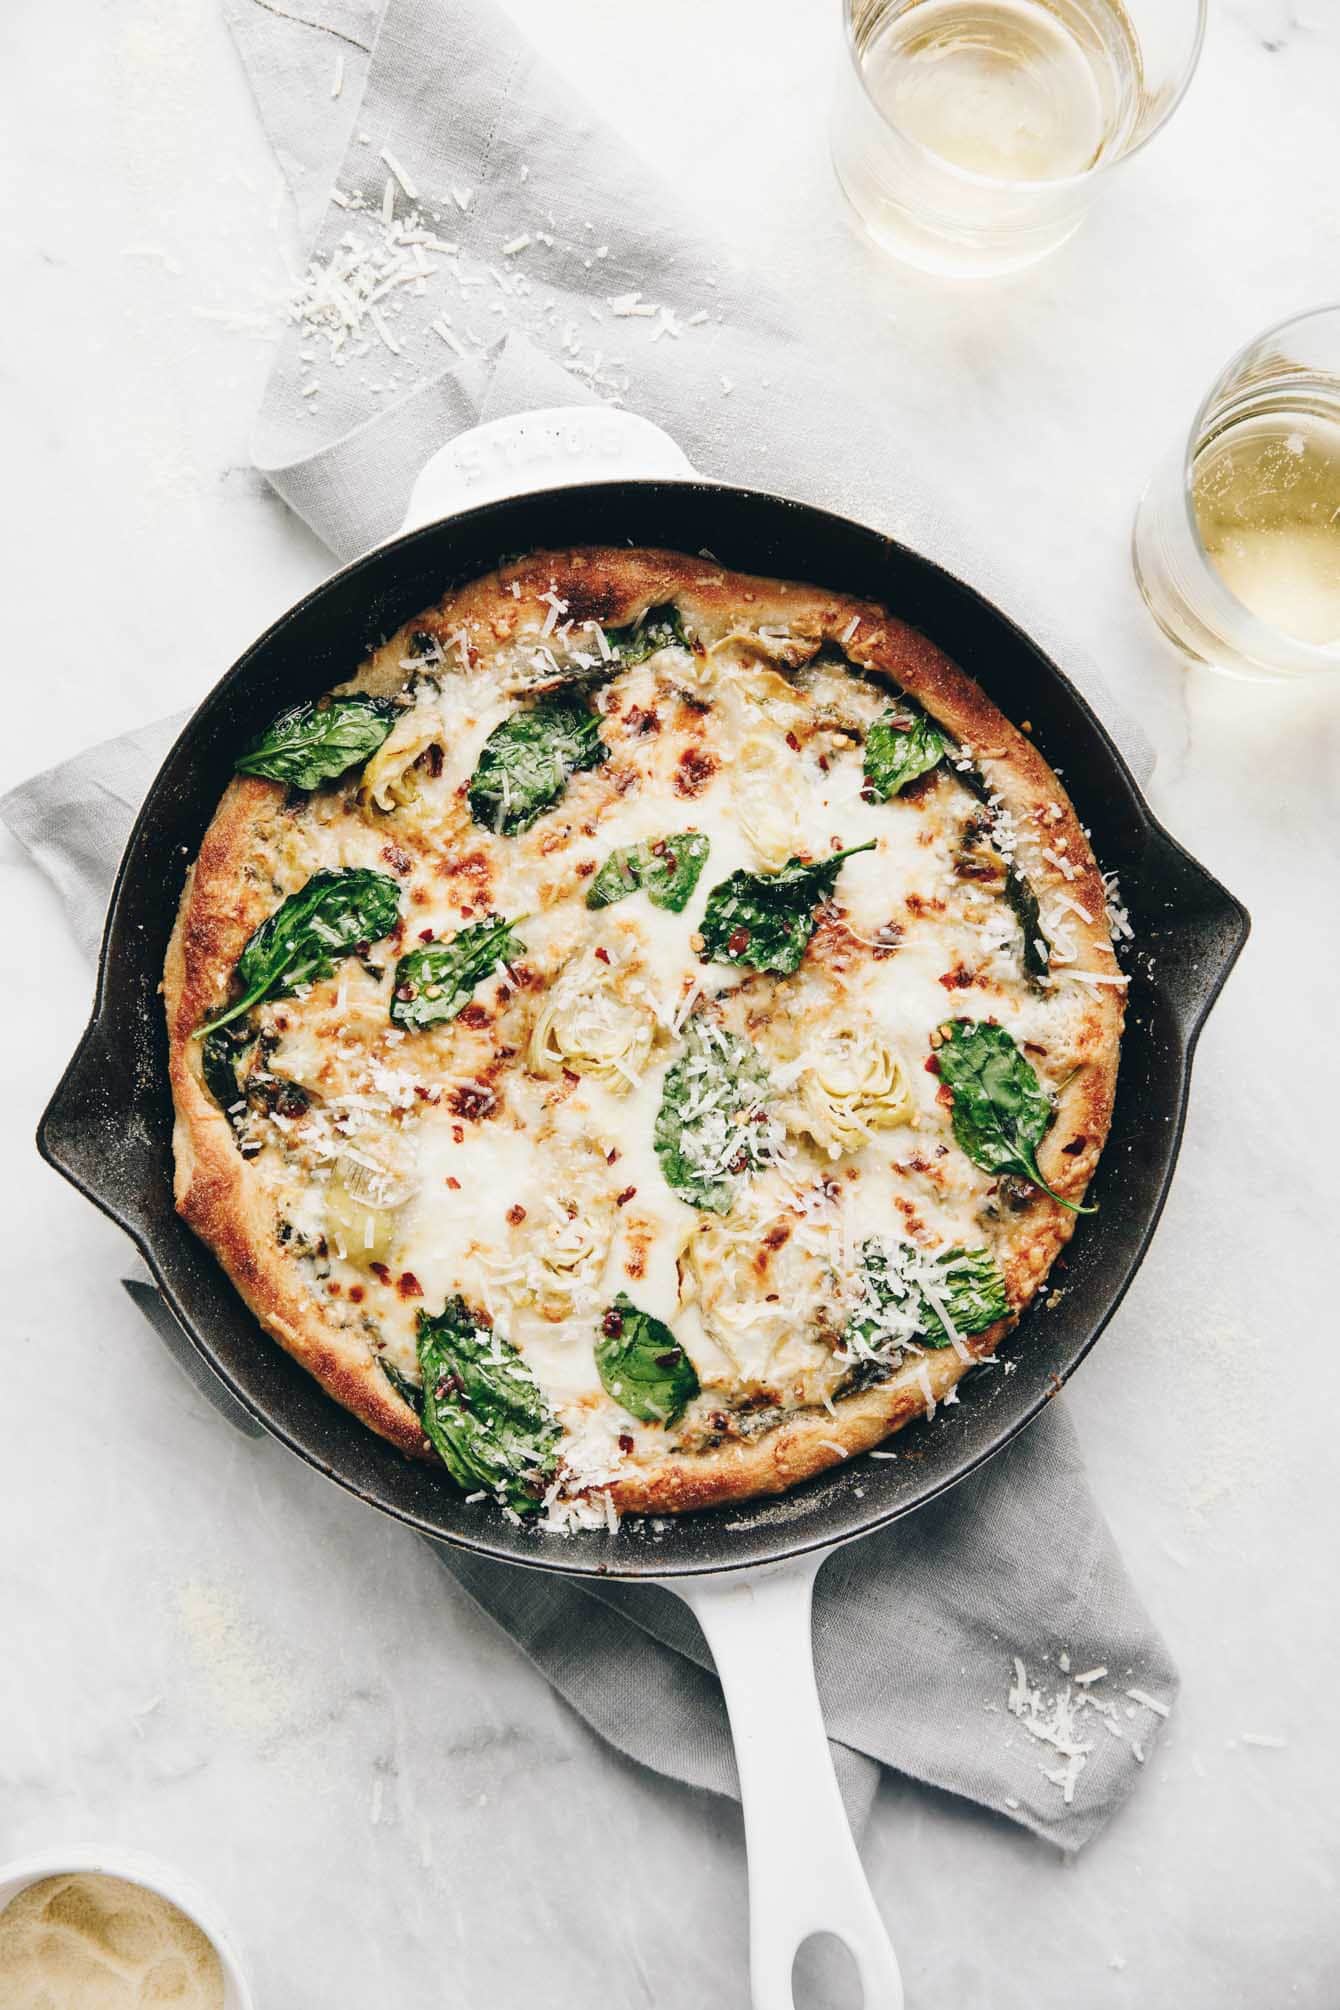 Easy cheesy spinach artichoke pizza so delicious, you'll eat the whole pie yourself